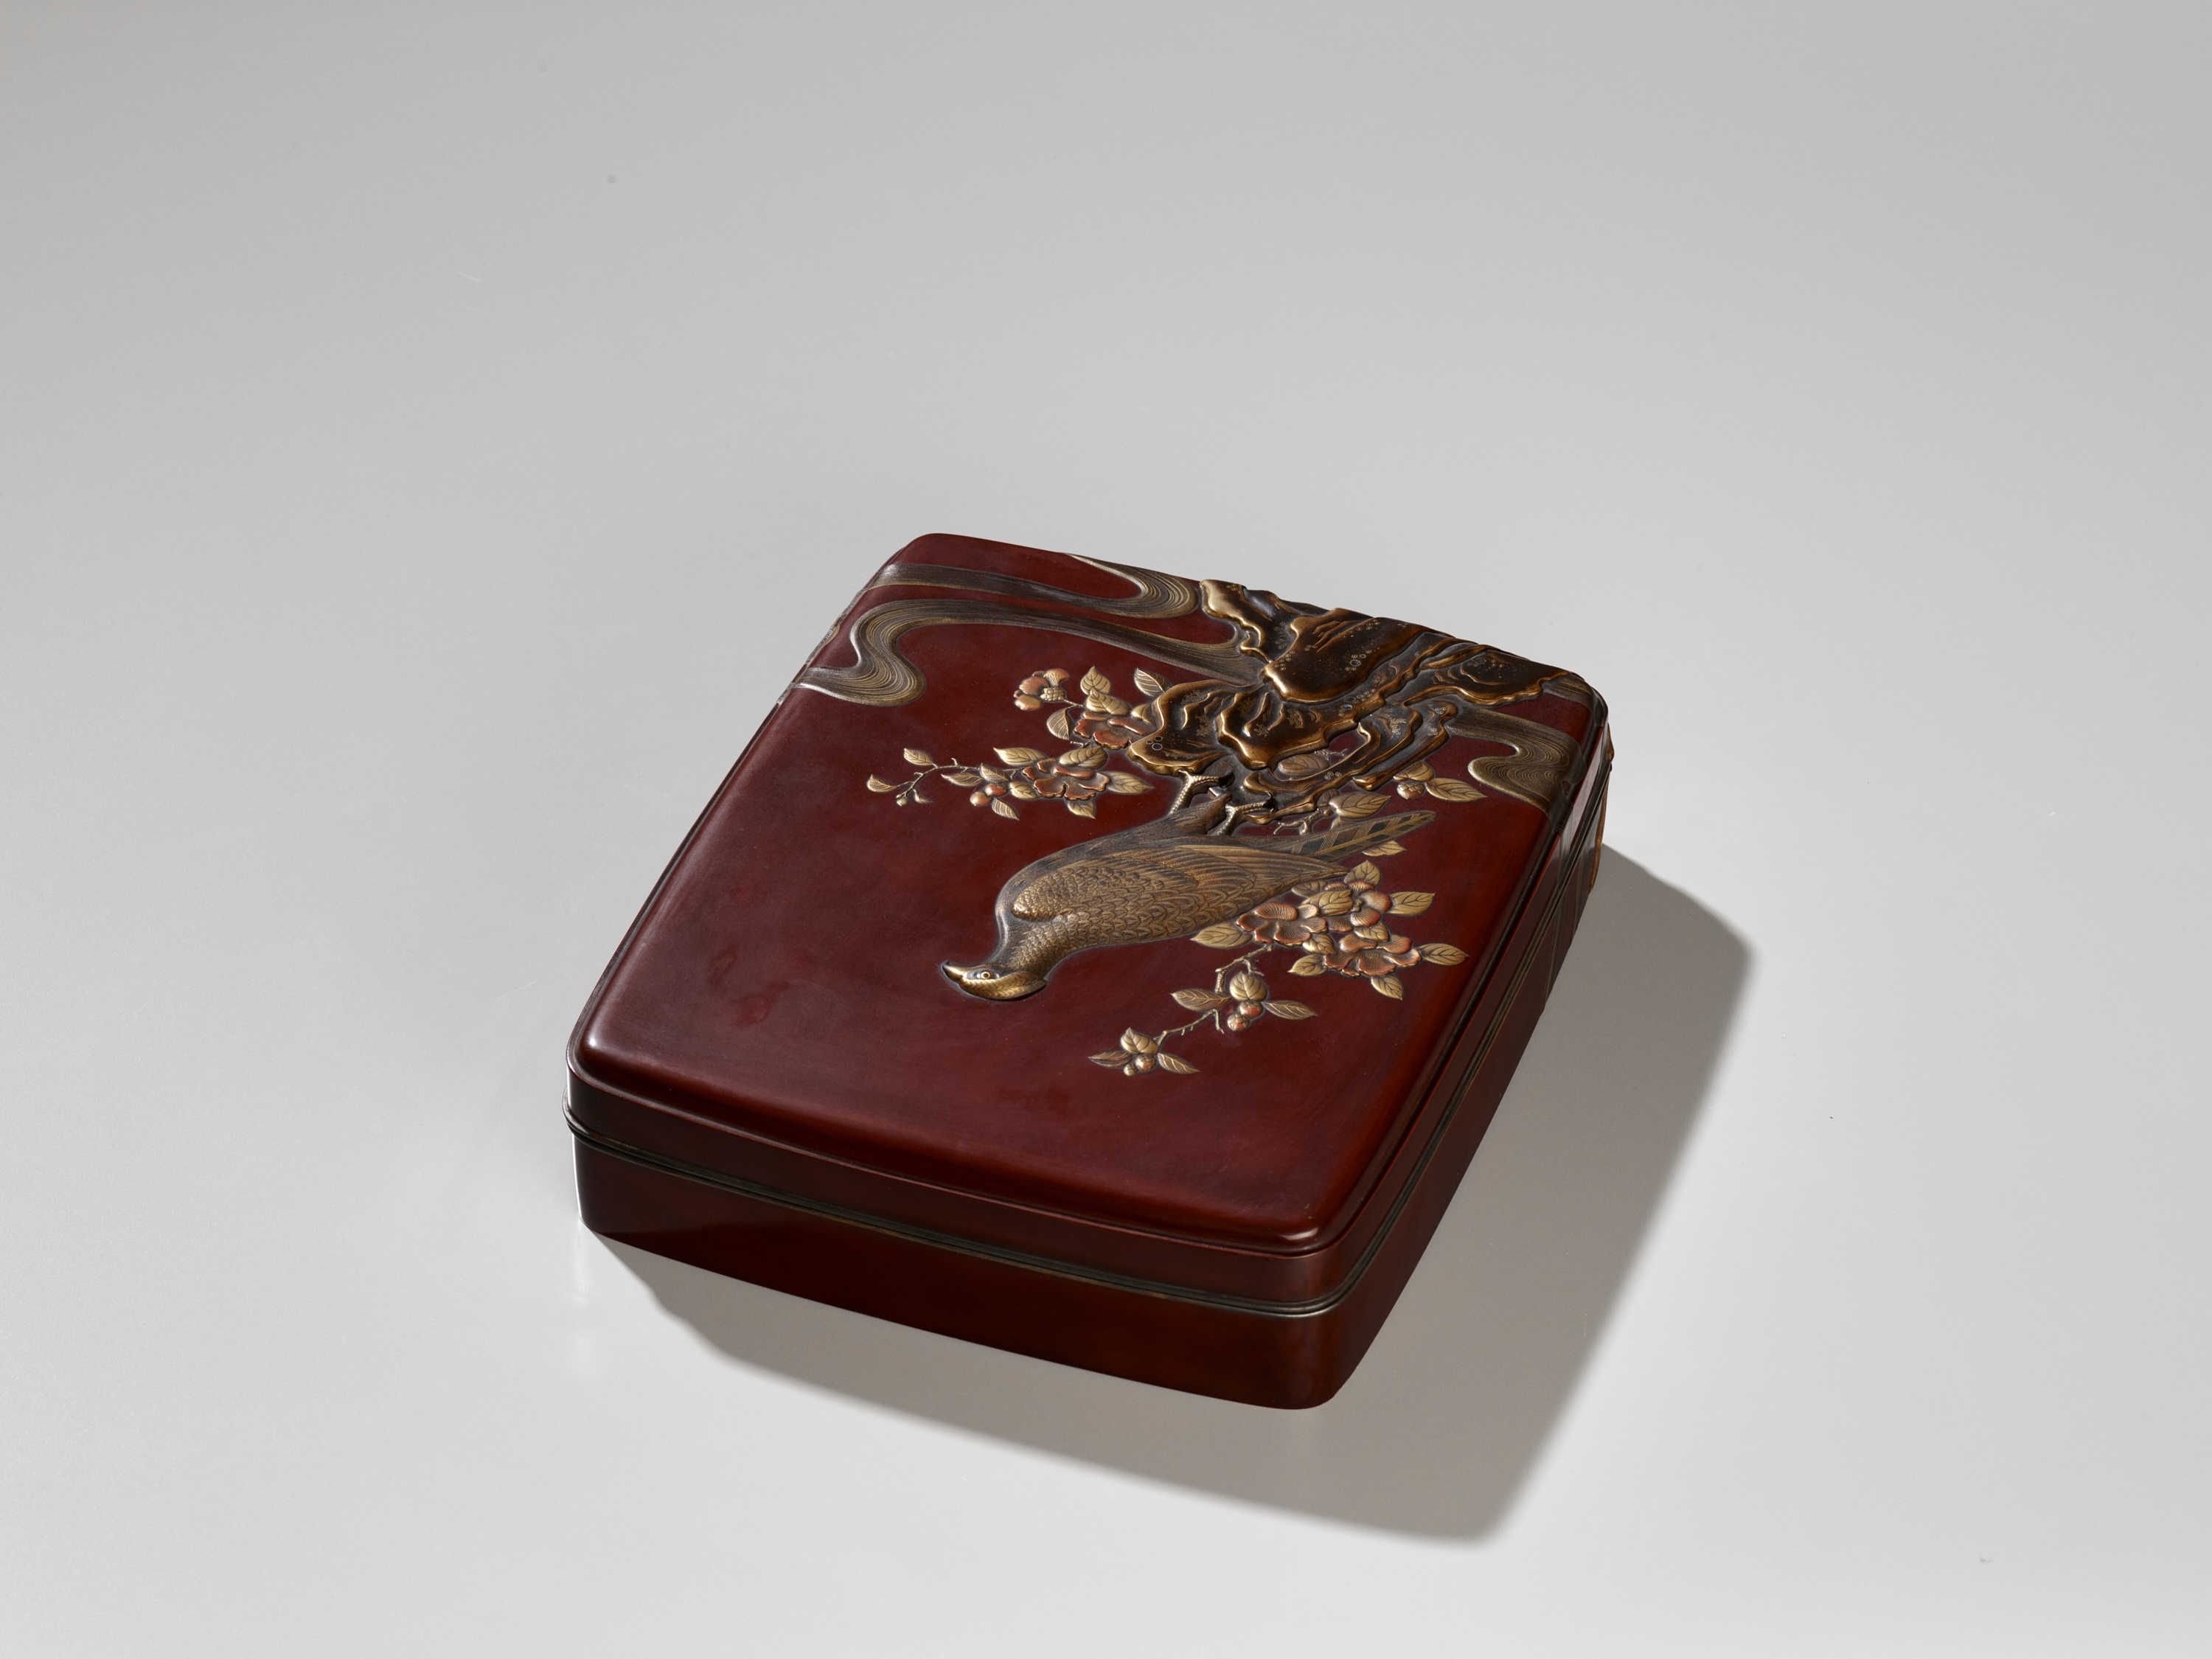 SHOGAKU: A SUPERB LACQUER SUZURIBAKO DEPICTING AN AUTUMNAL SCENE WITH FALCON AND SPARROWS - Image 10 of 14